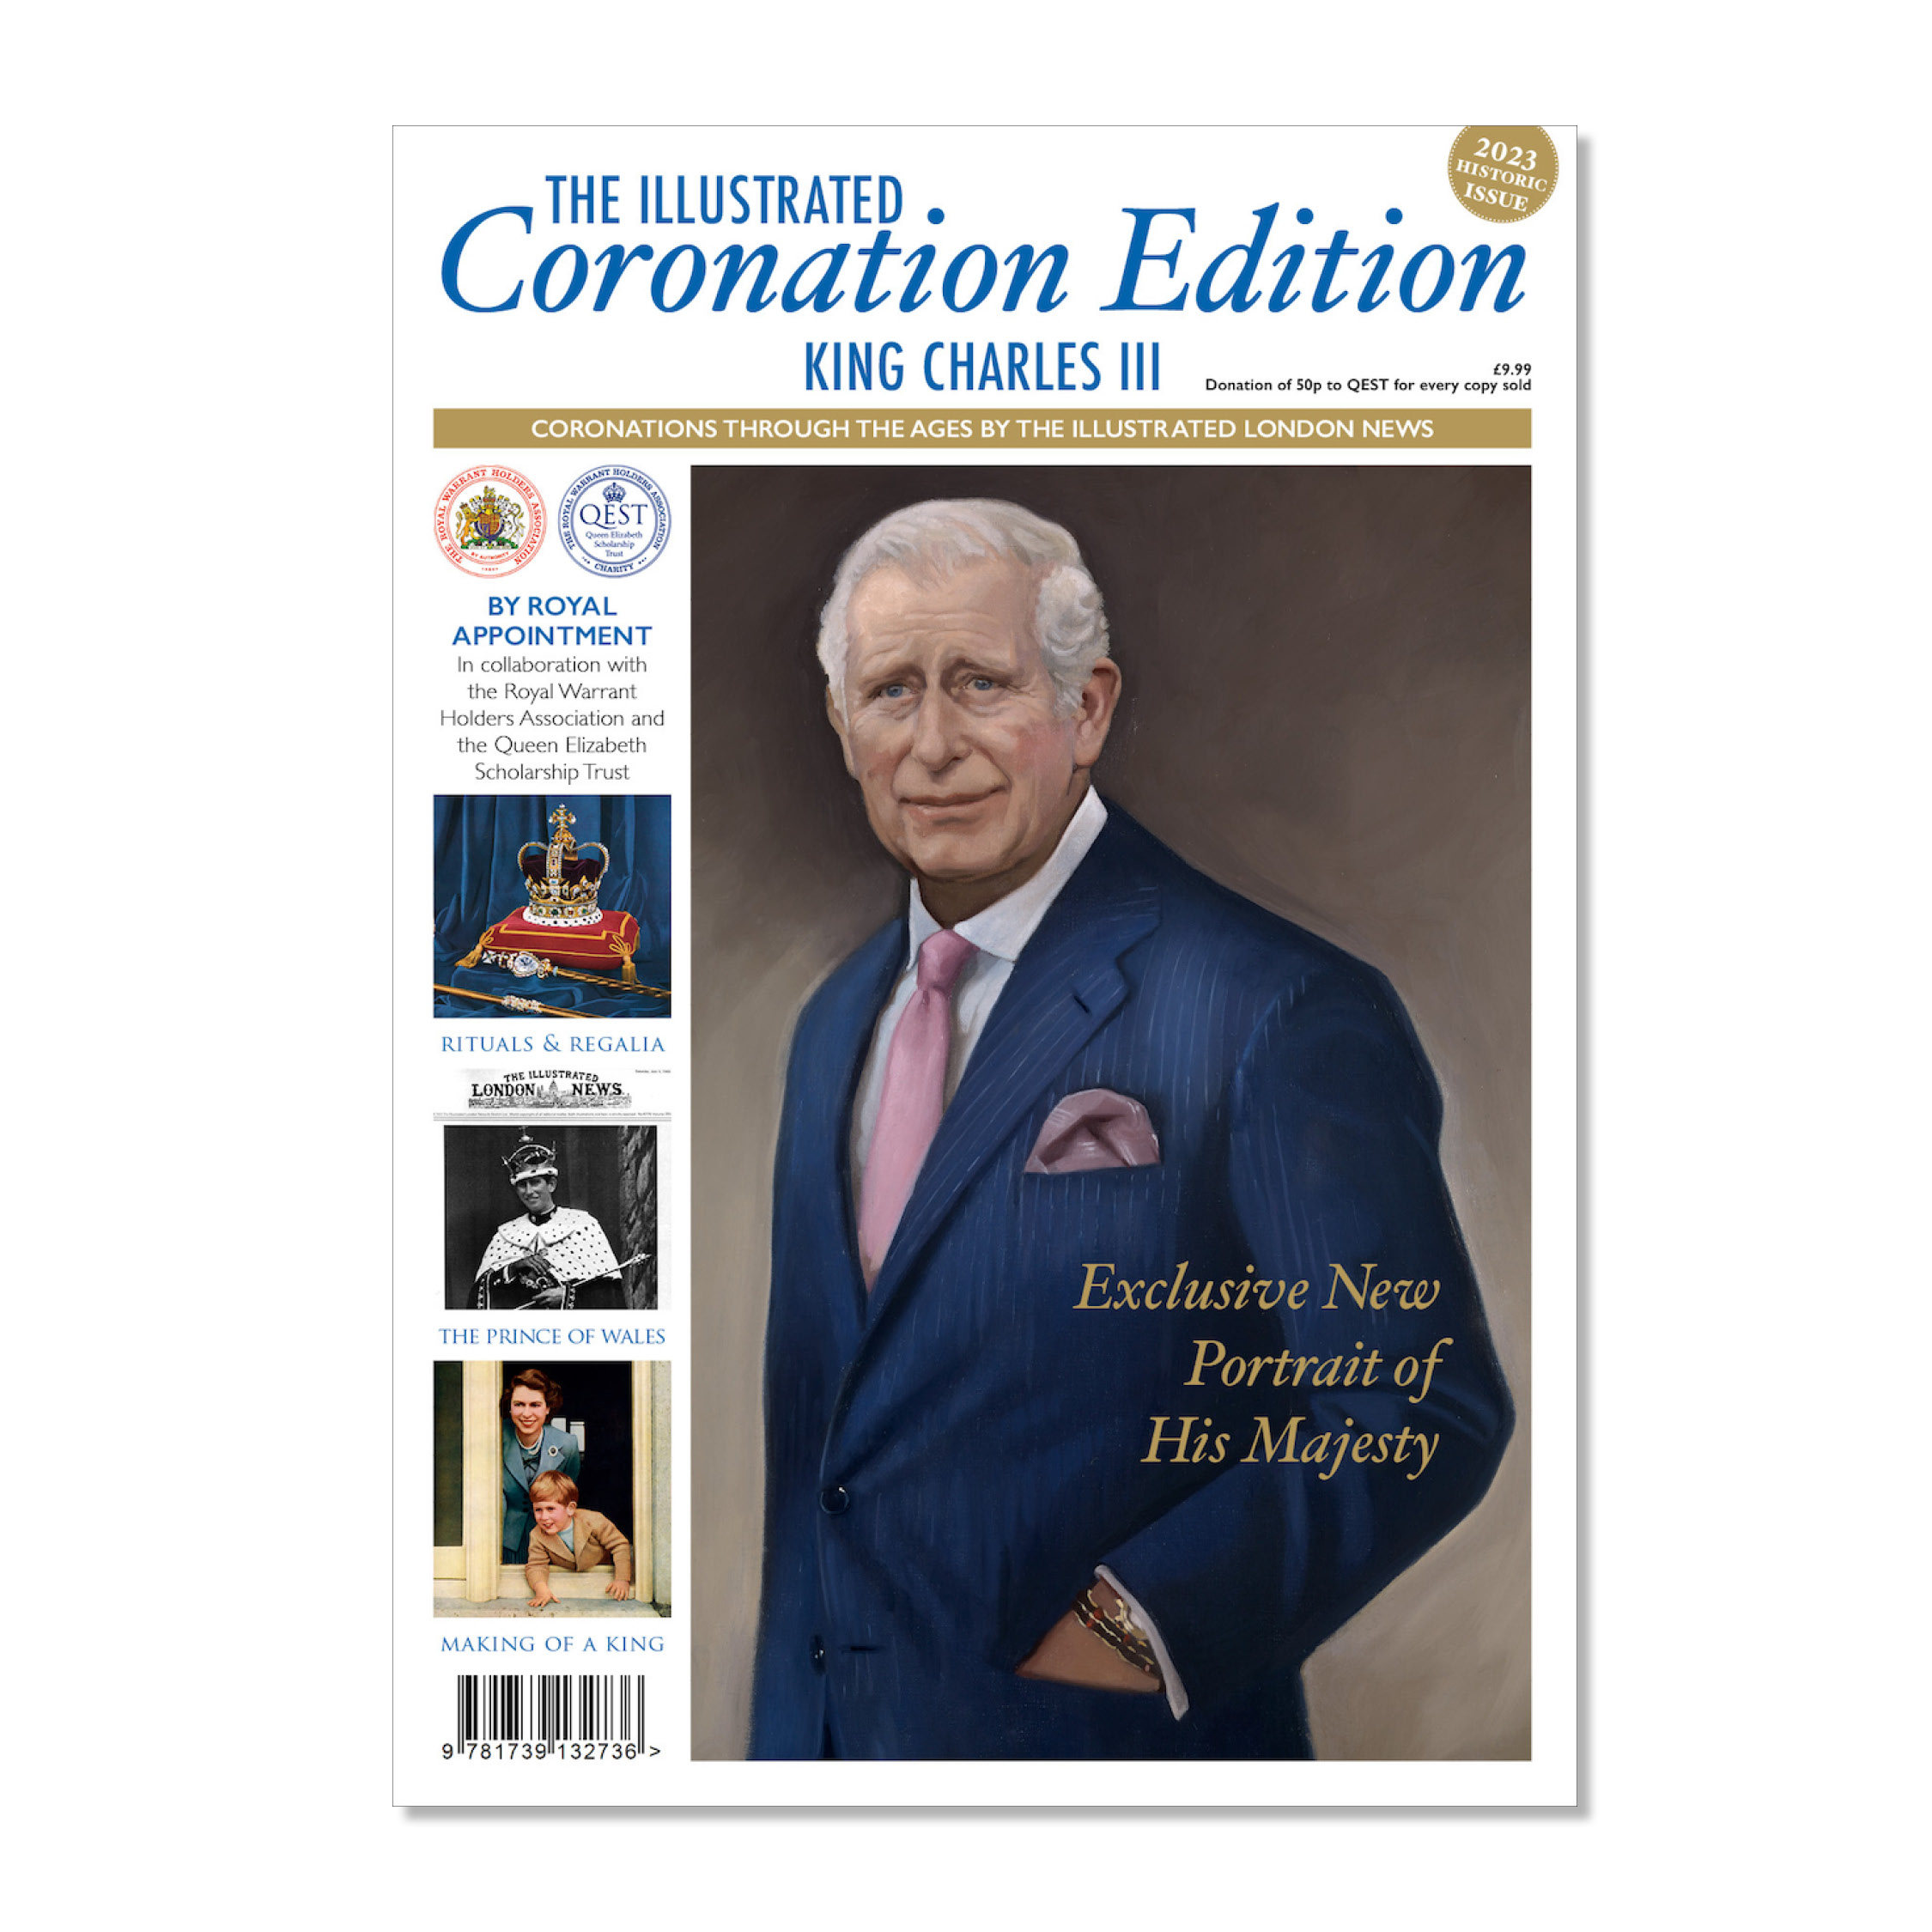 The Illustrated Coronation Edition by ILN featuring the portrait by Alastair Barford